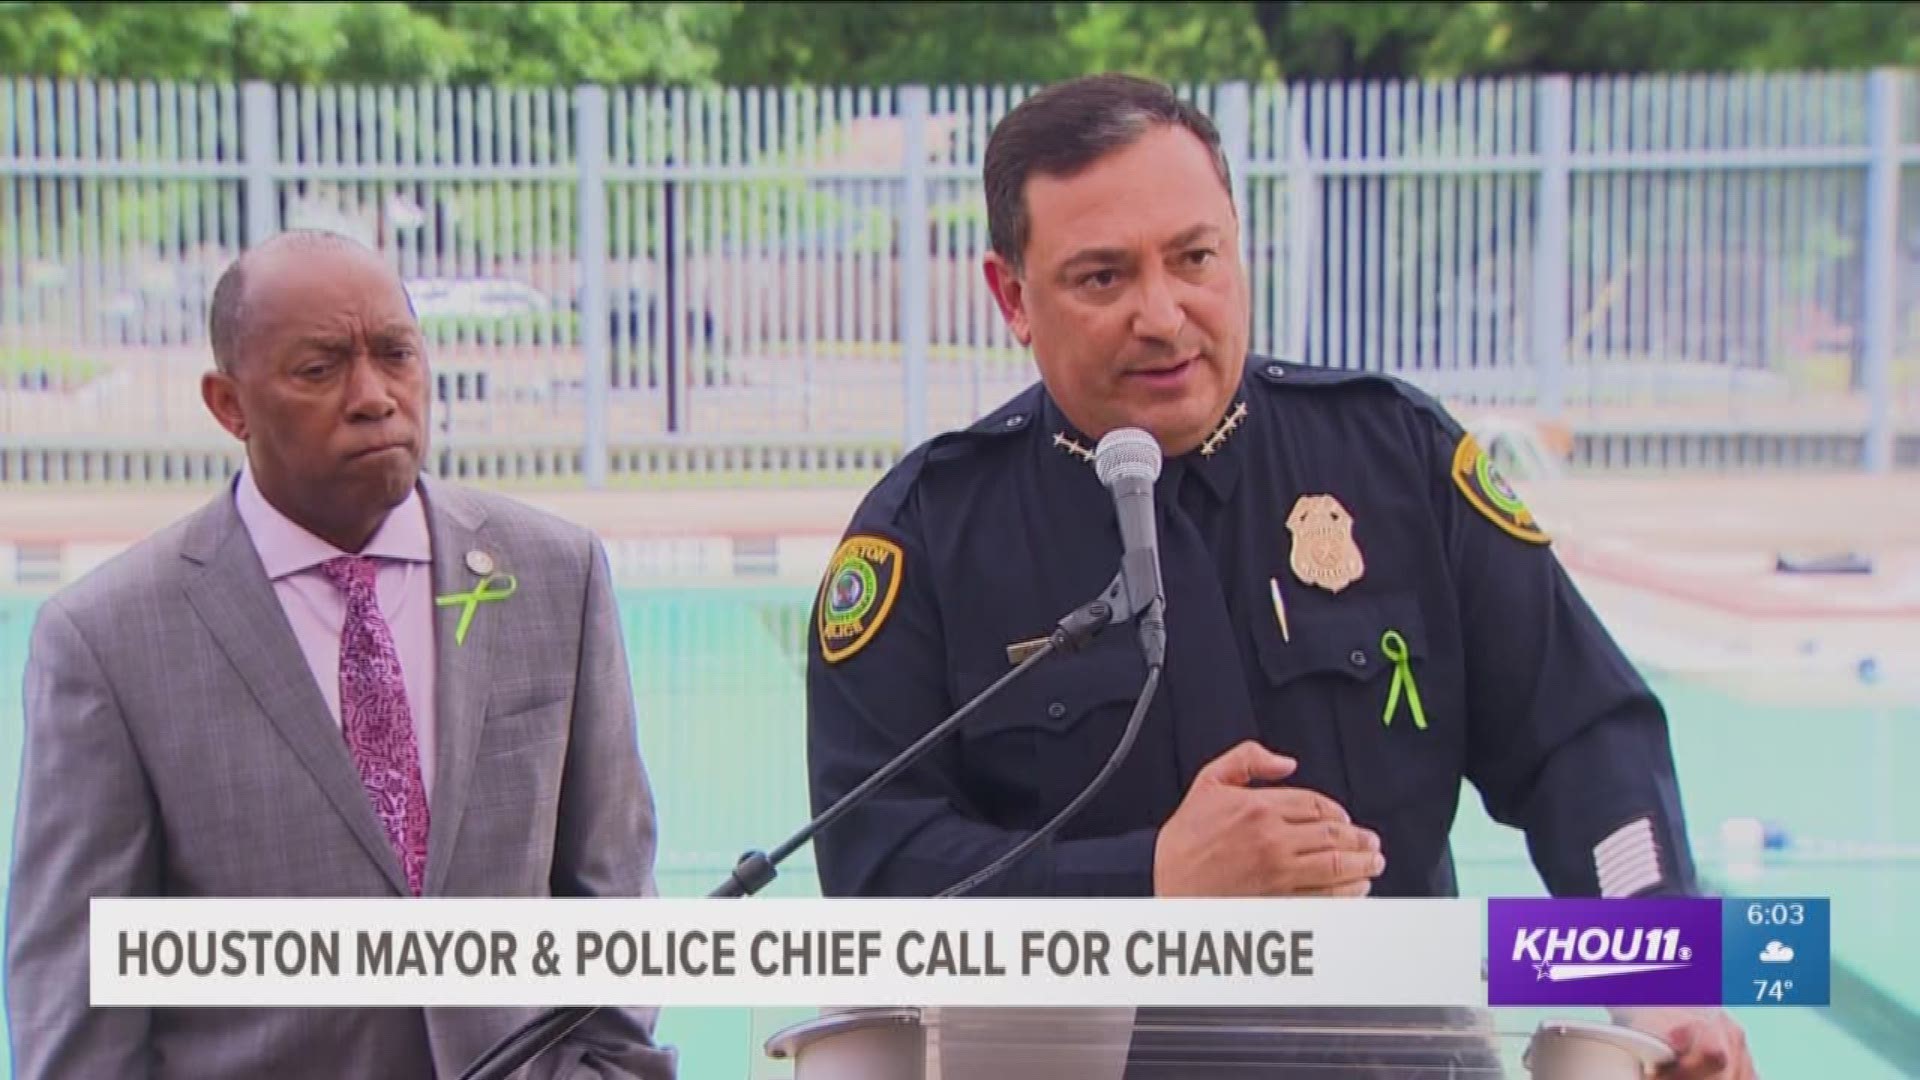 The Houston mayor and police chief have been vocal since Friday about change to make students safe in schools. 